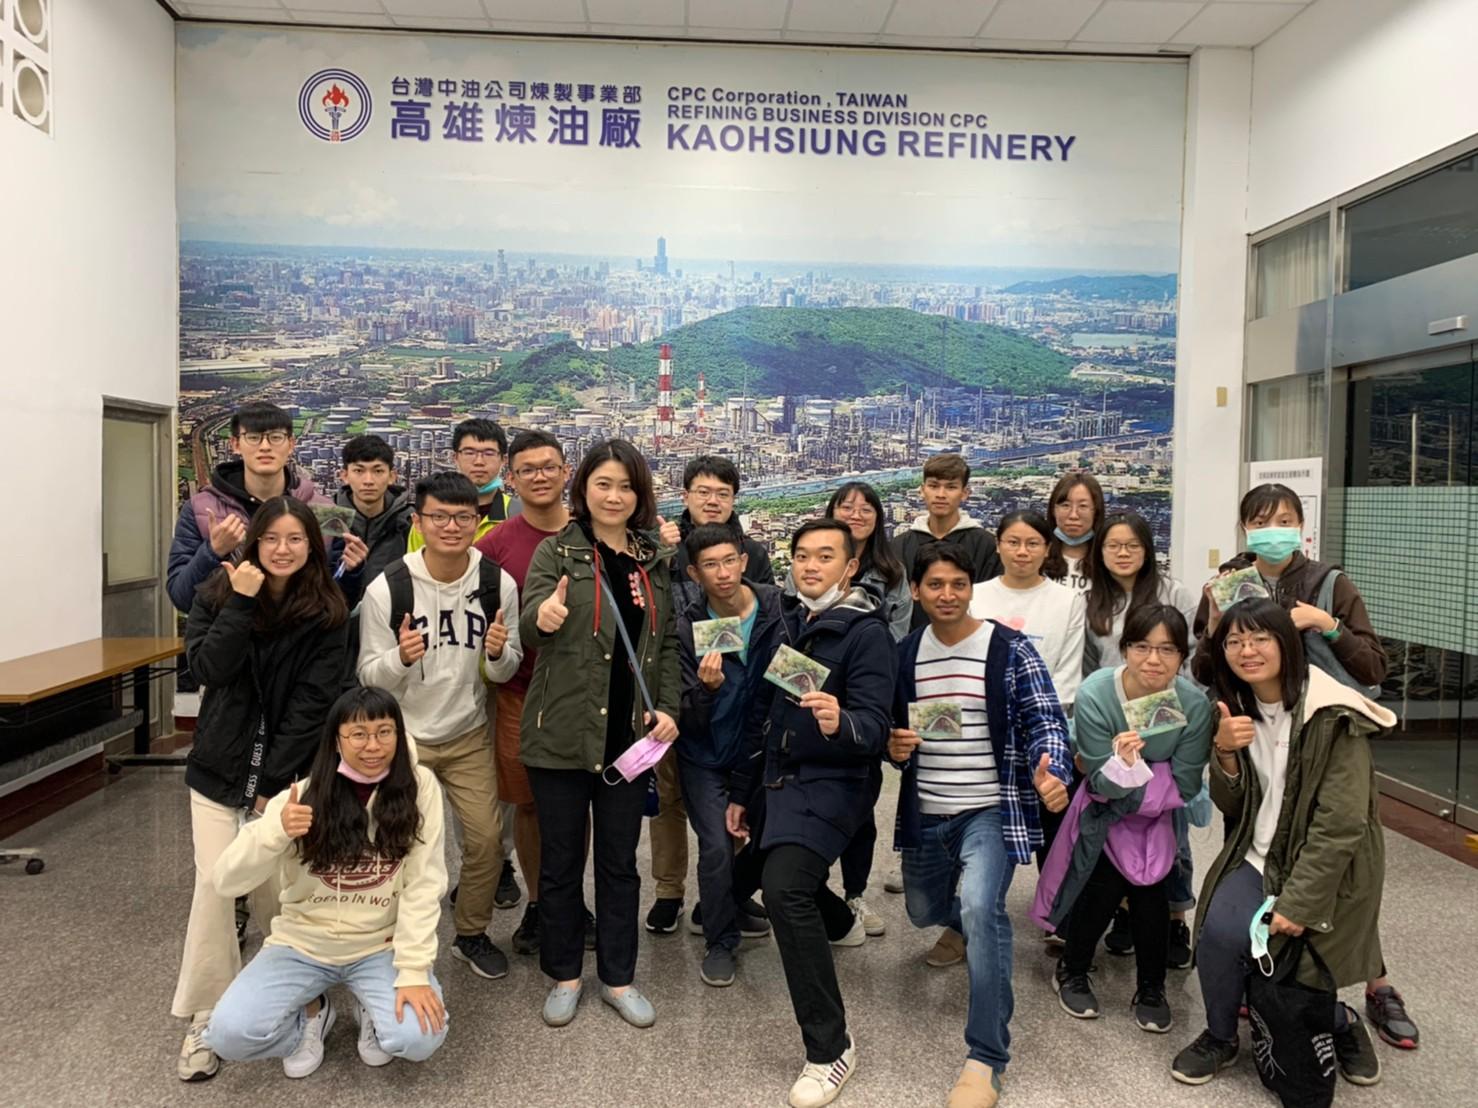 The extracurricular for PM2.5 aerosol medical science visit CPC Kaohsiung Refinery Environmental Education Park